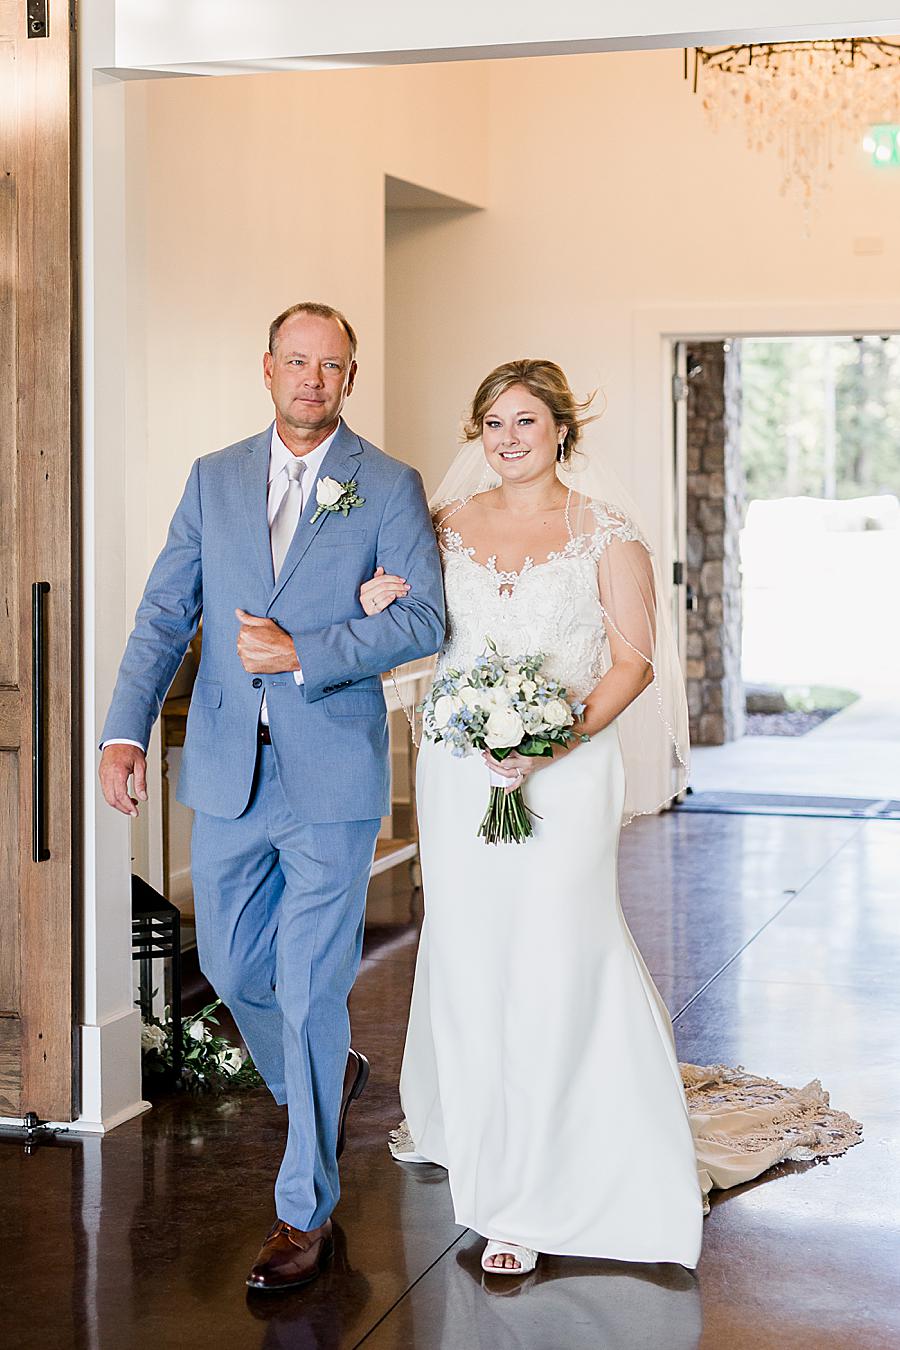 Walking down the aisle at this Graystone Quarry wedding by Knoxville Wedding Photographer, Amanda May Photos.